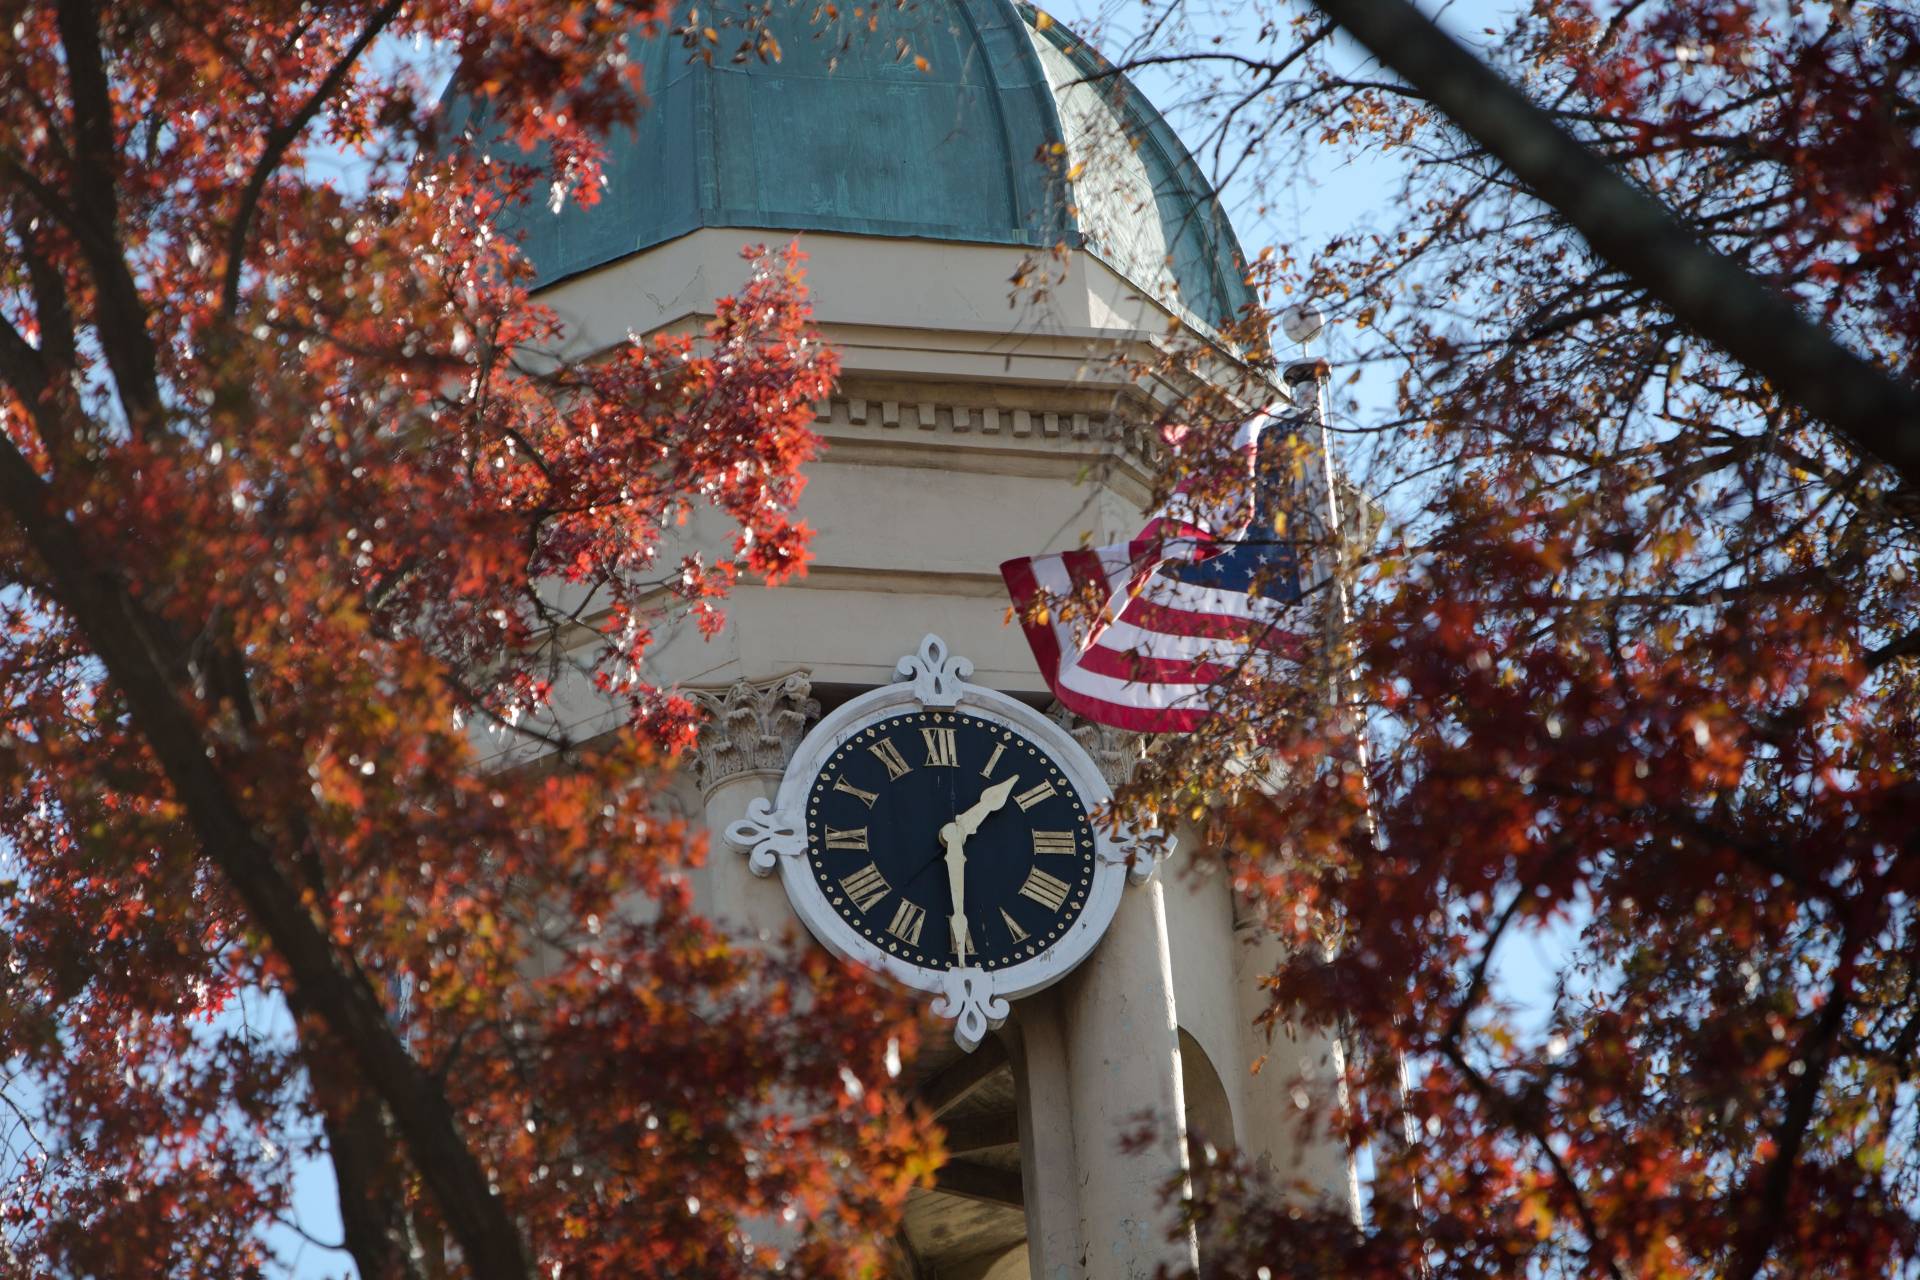 The cupola of Nassau Hall showing its clock and an American flag